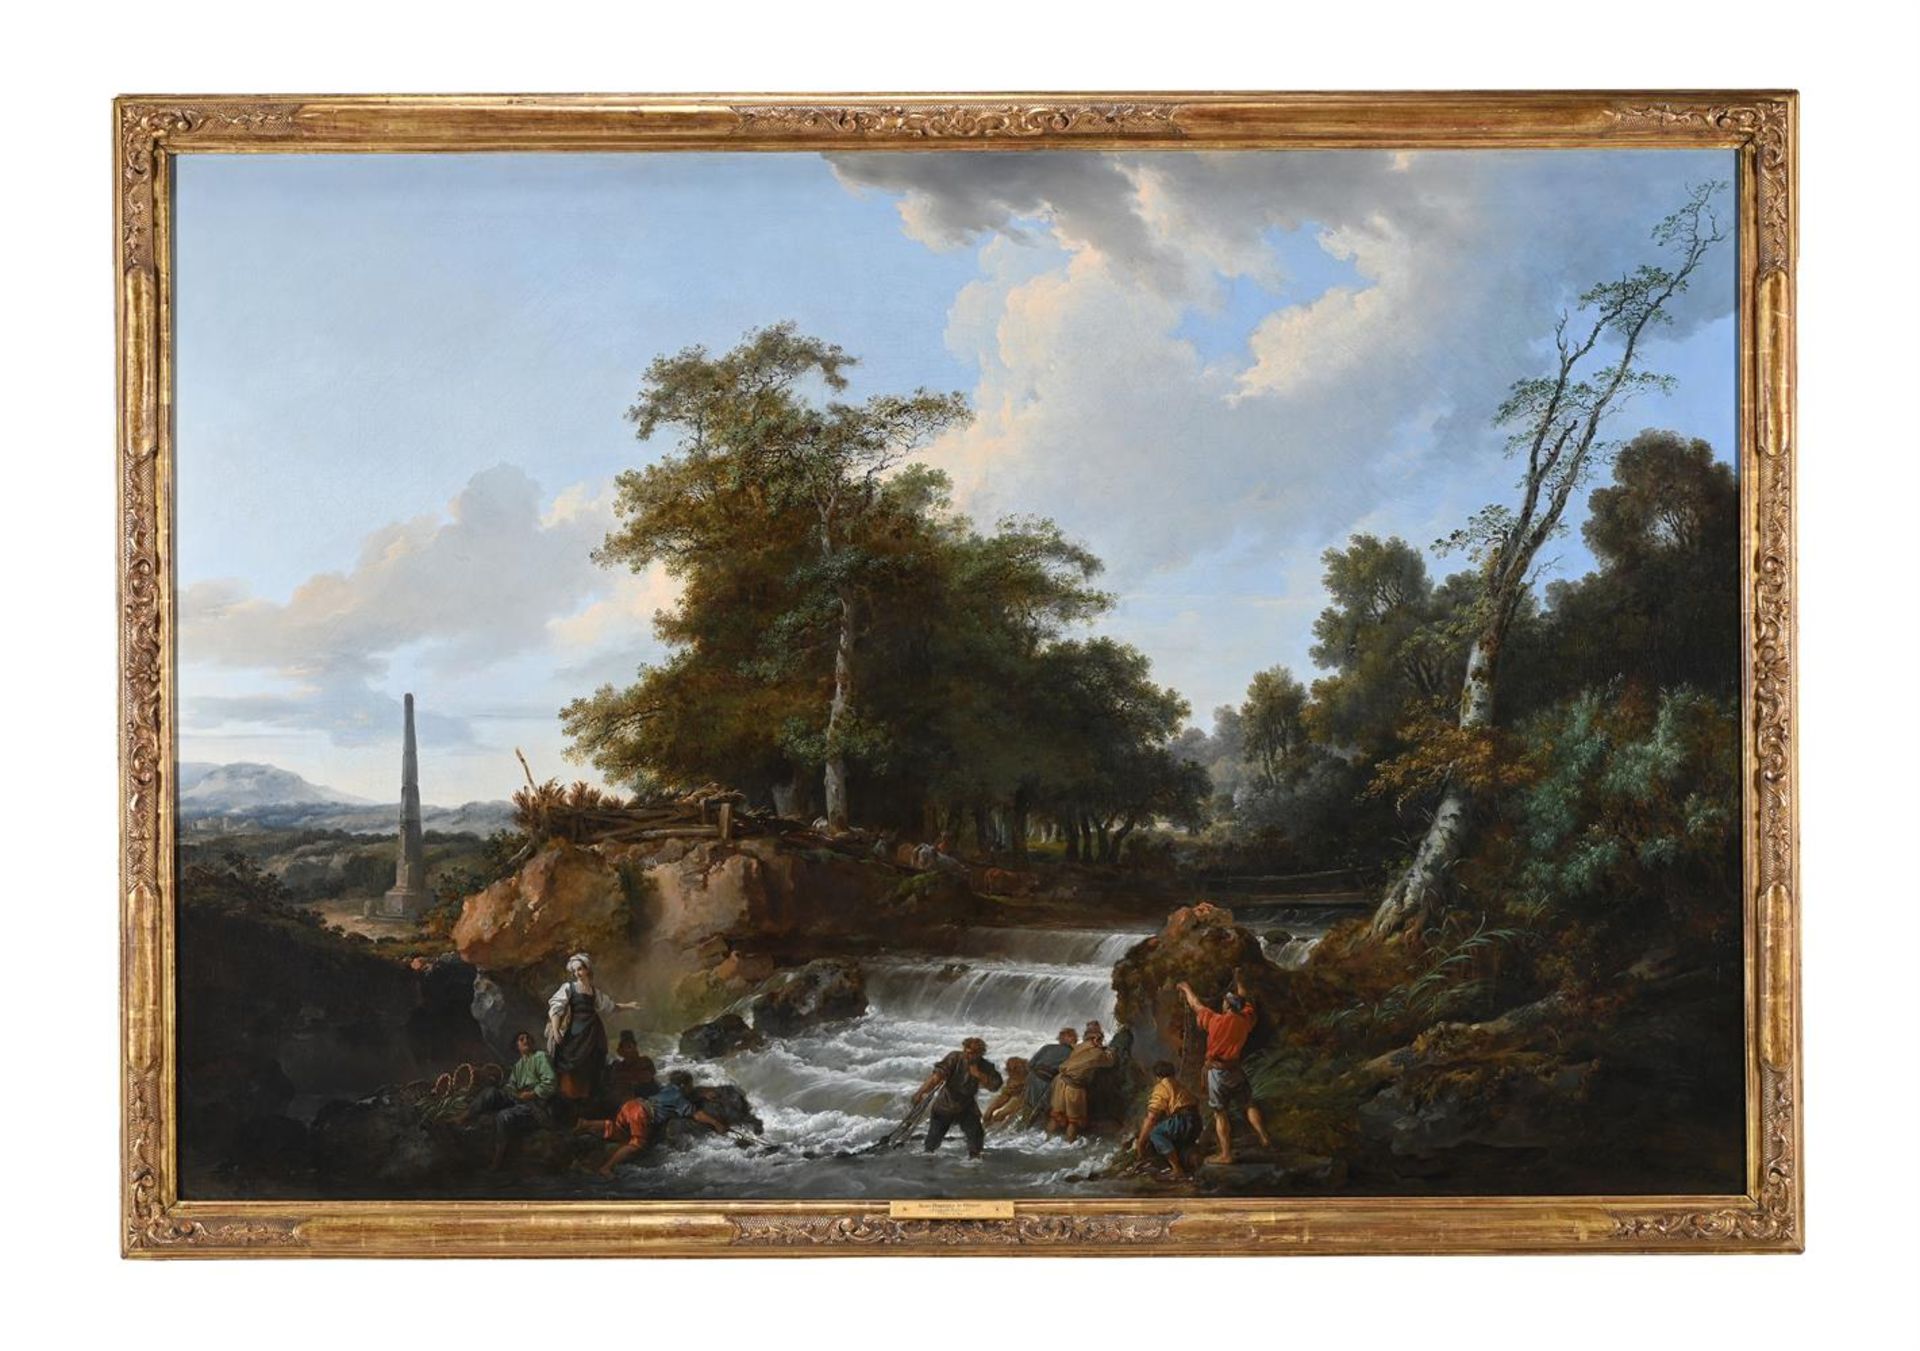 JEAN-BAPTISTE LE PRINCE (FRENCH 1734-1781), FISHERFOLK LAYING NETS BY A WATERFALL - Image 2 of 3